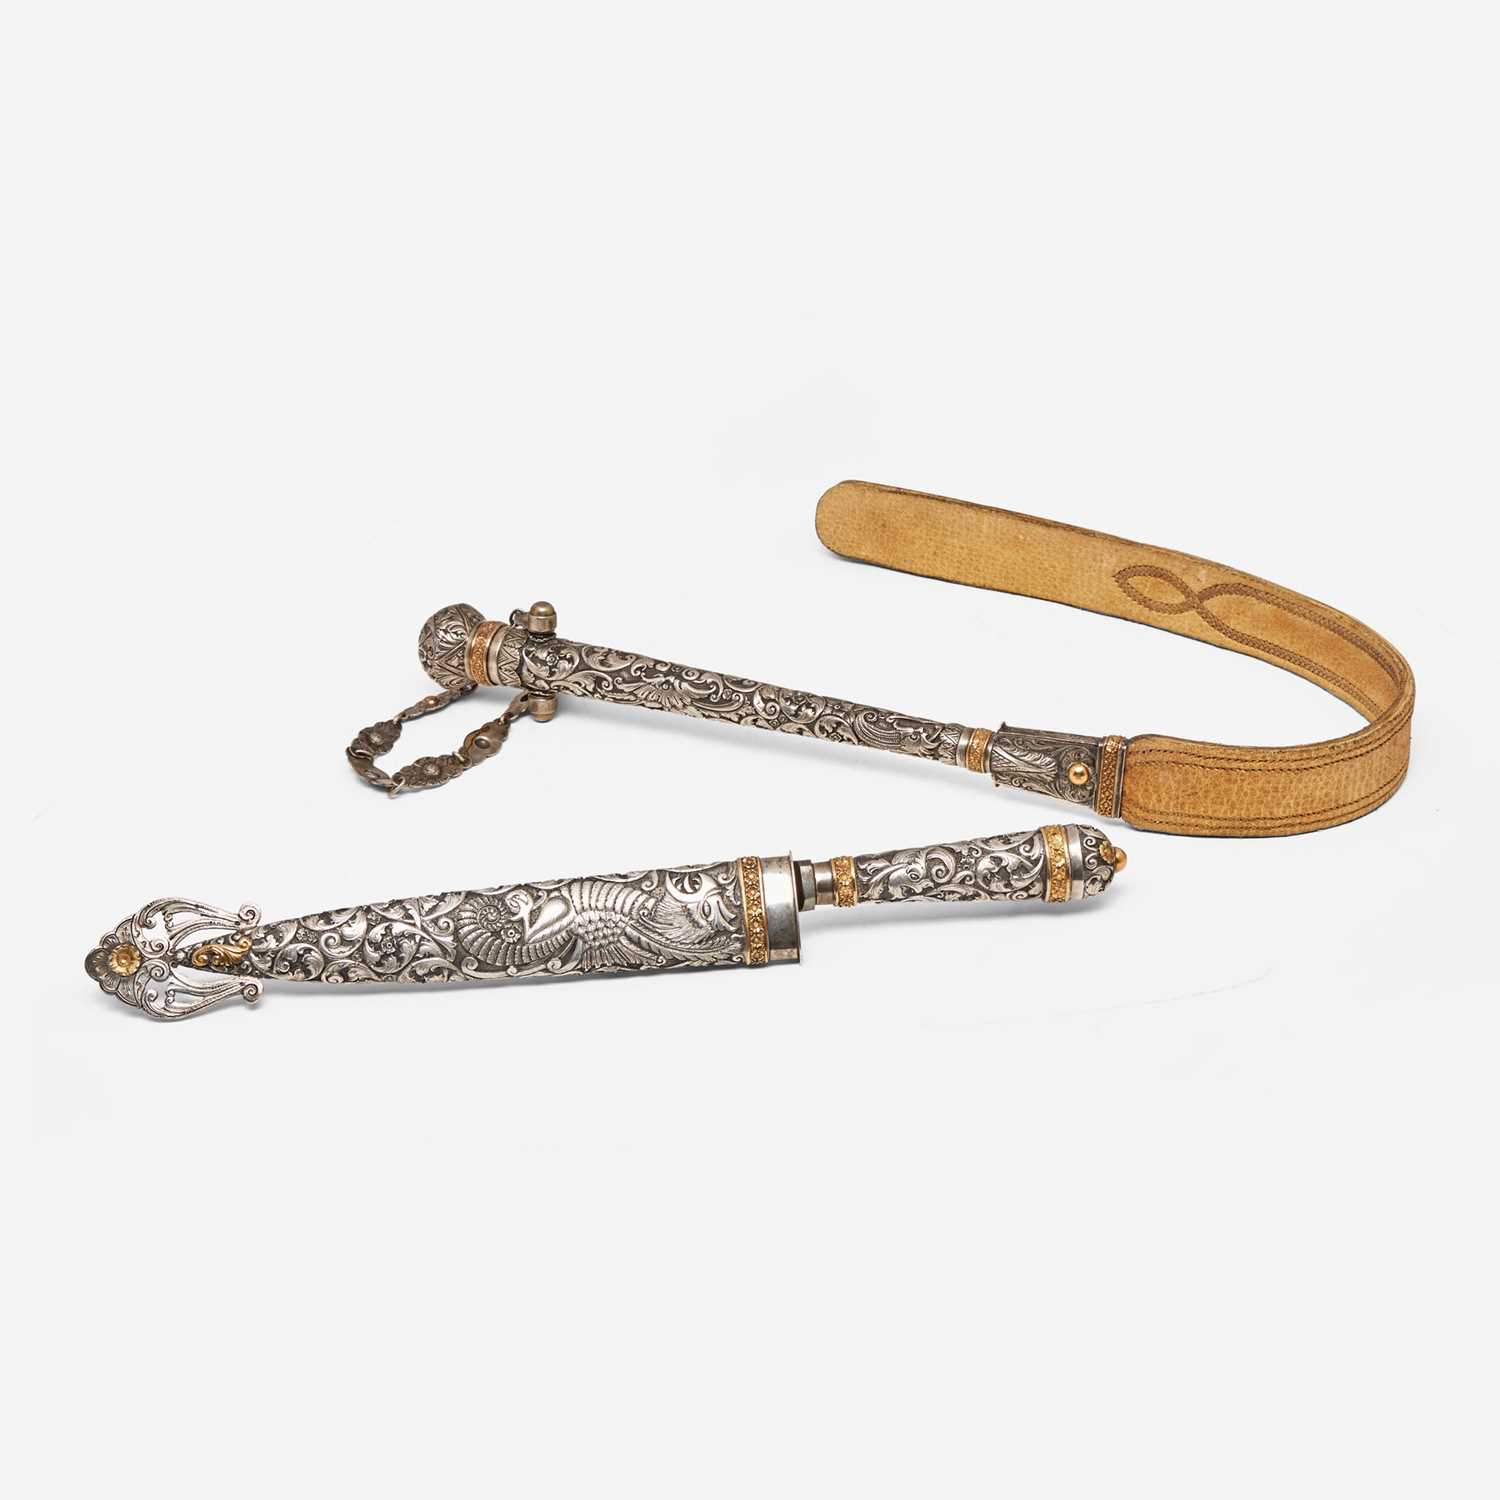 Lot 63 - A repoussé silver and gold gaucho knife and flogger